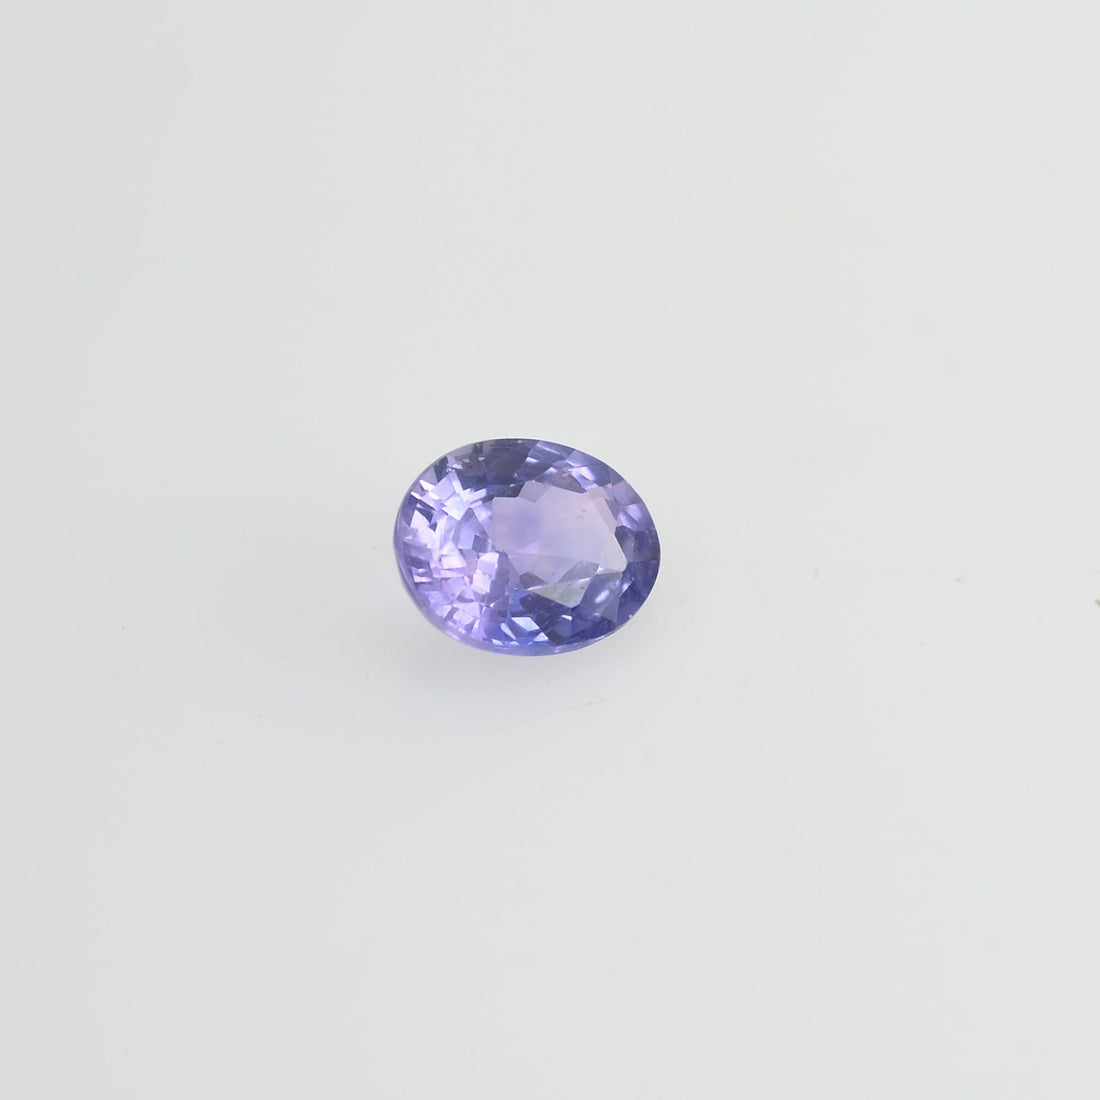 0.21 cts Natural Purple Sapphire Loose Gemstone Oval Cut